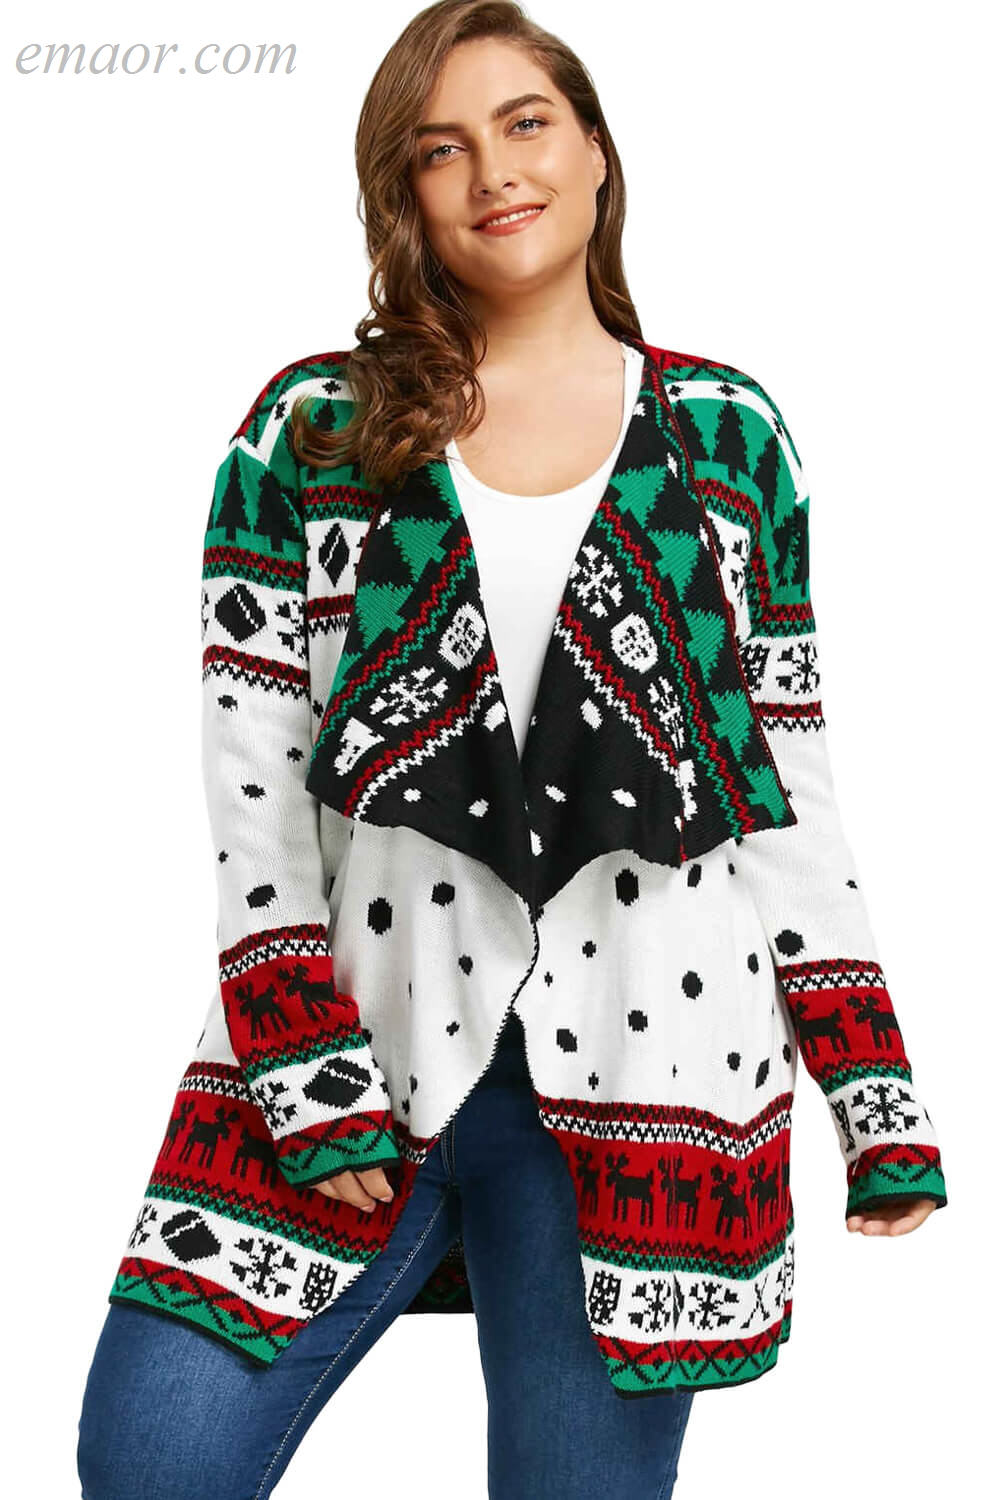 Outerwear Affordable Big And Tall Outerwear Ambiance on Sale Blocked Christmas Cardigan Best Girl Outerwear